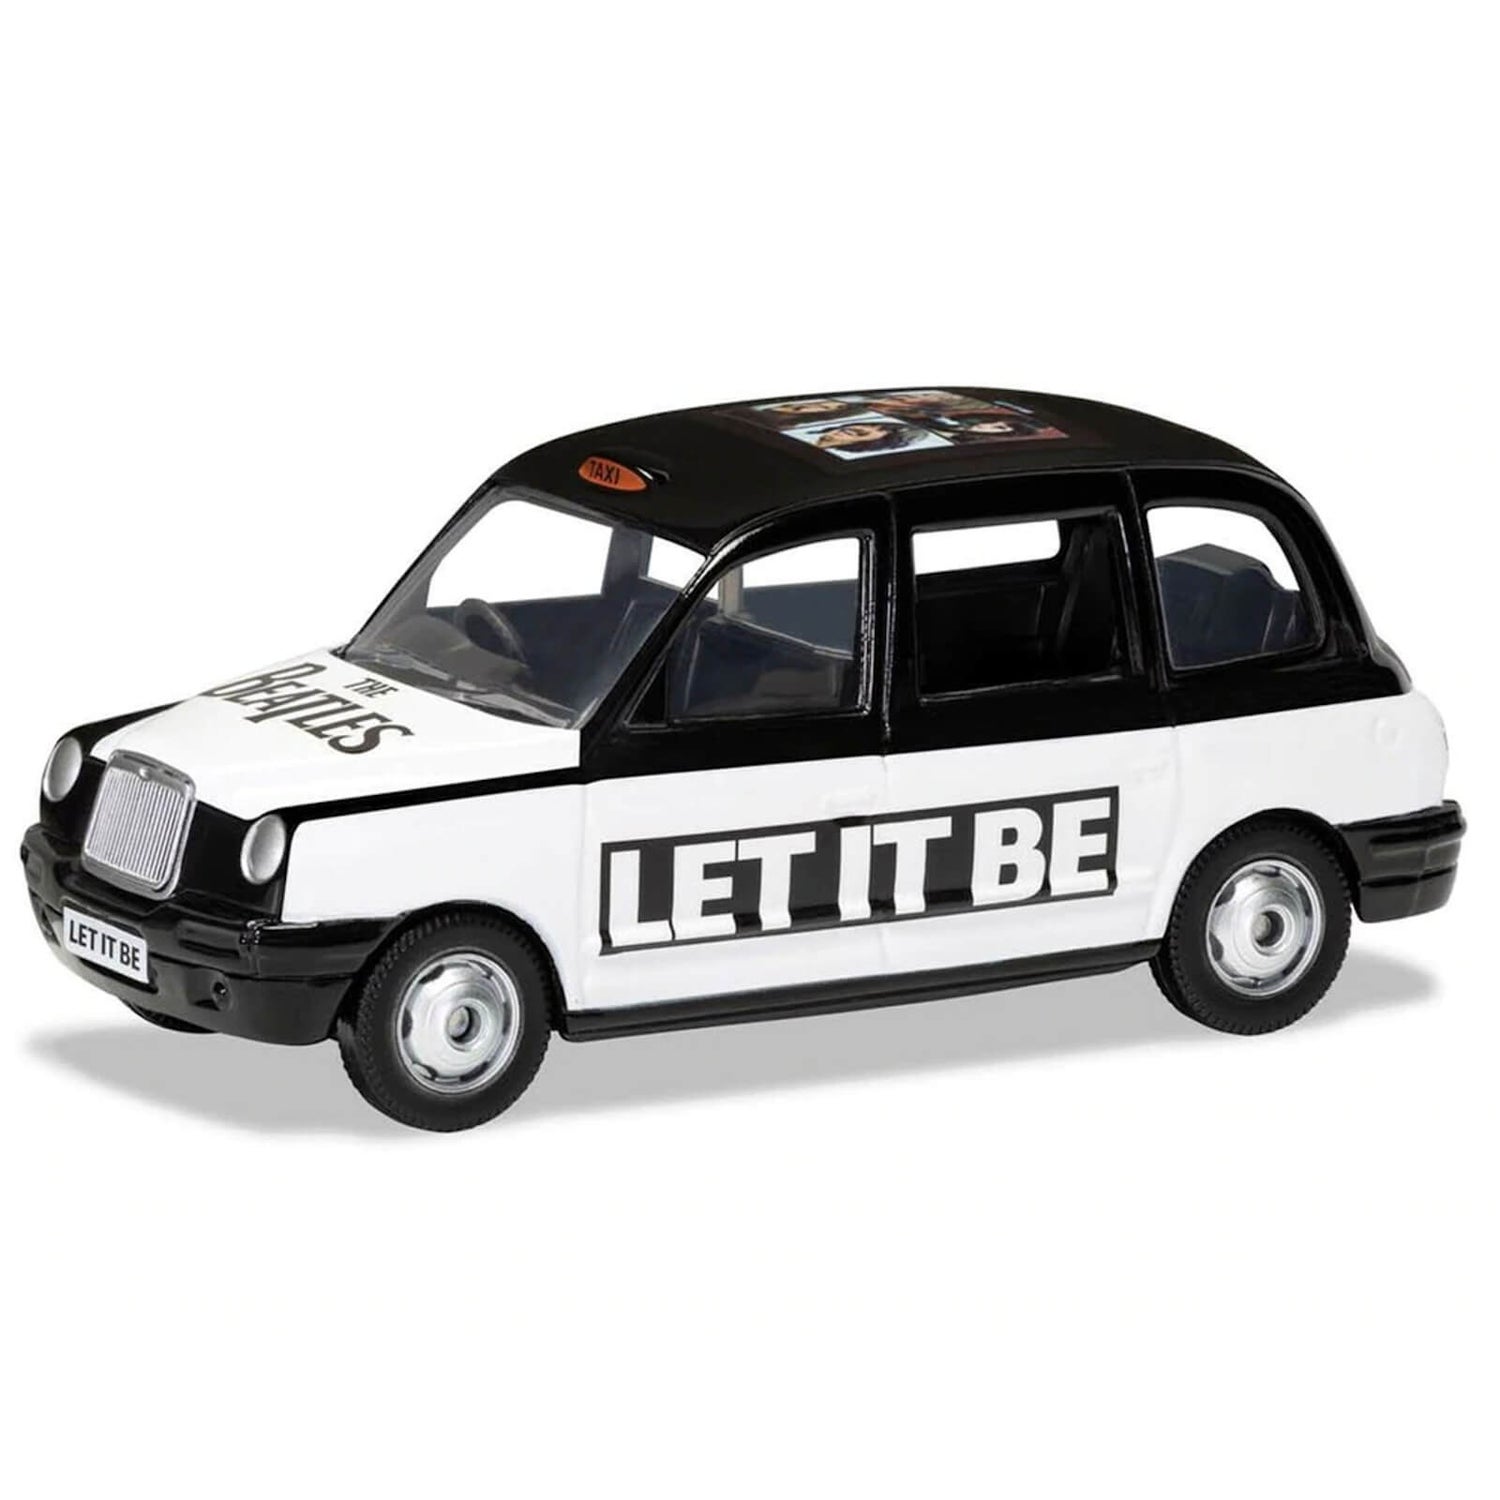 The Beatles London Taxi Let it Be Model Set - Scale 1:36